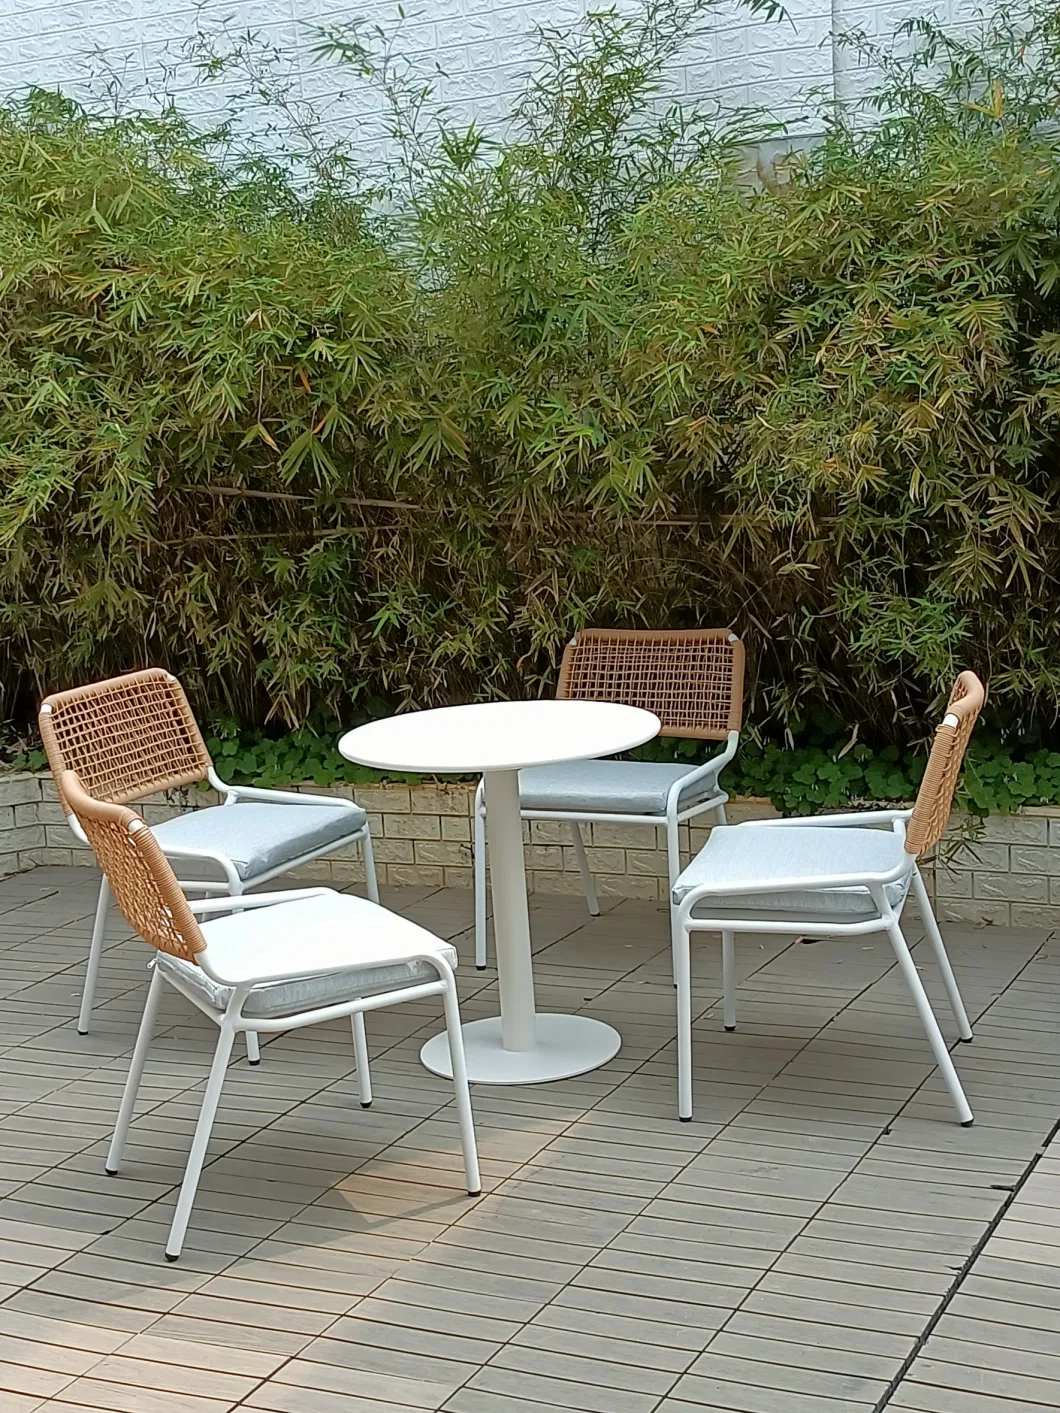 Garden Chair Manufacture Rope Weaving Woven Rope Patio Chair Modern Balcony Plastic String Chair Rattan Rope Outdoor Garden Dining Chair with Umbrella